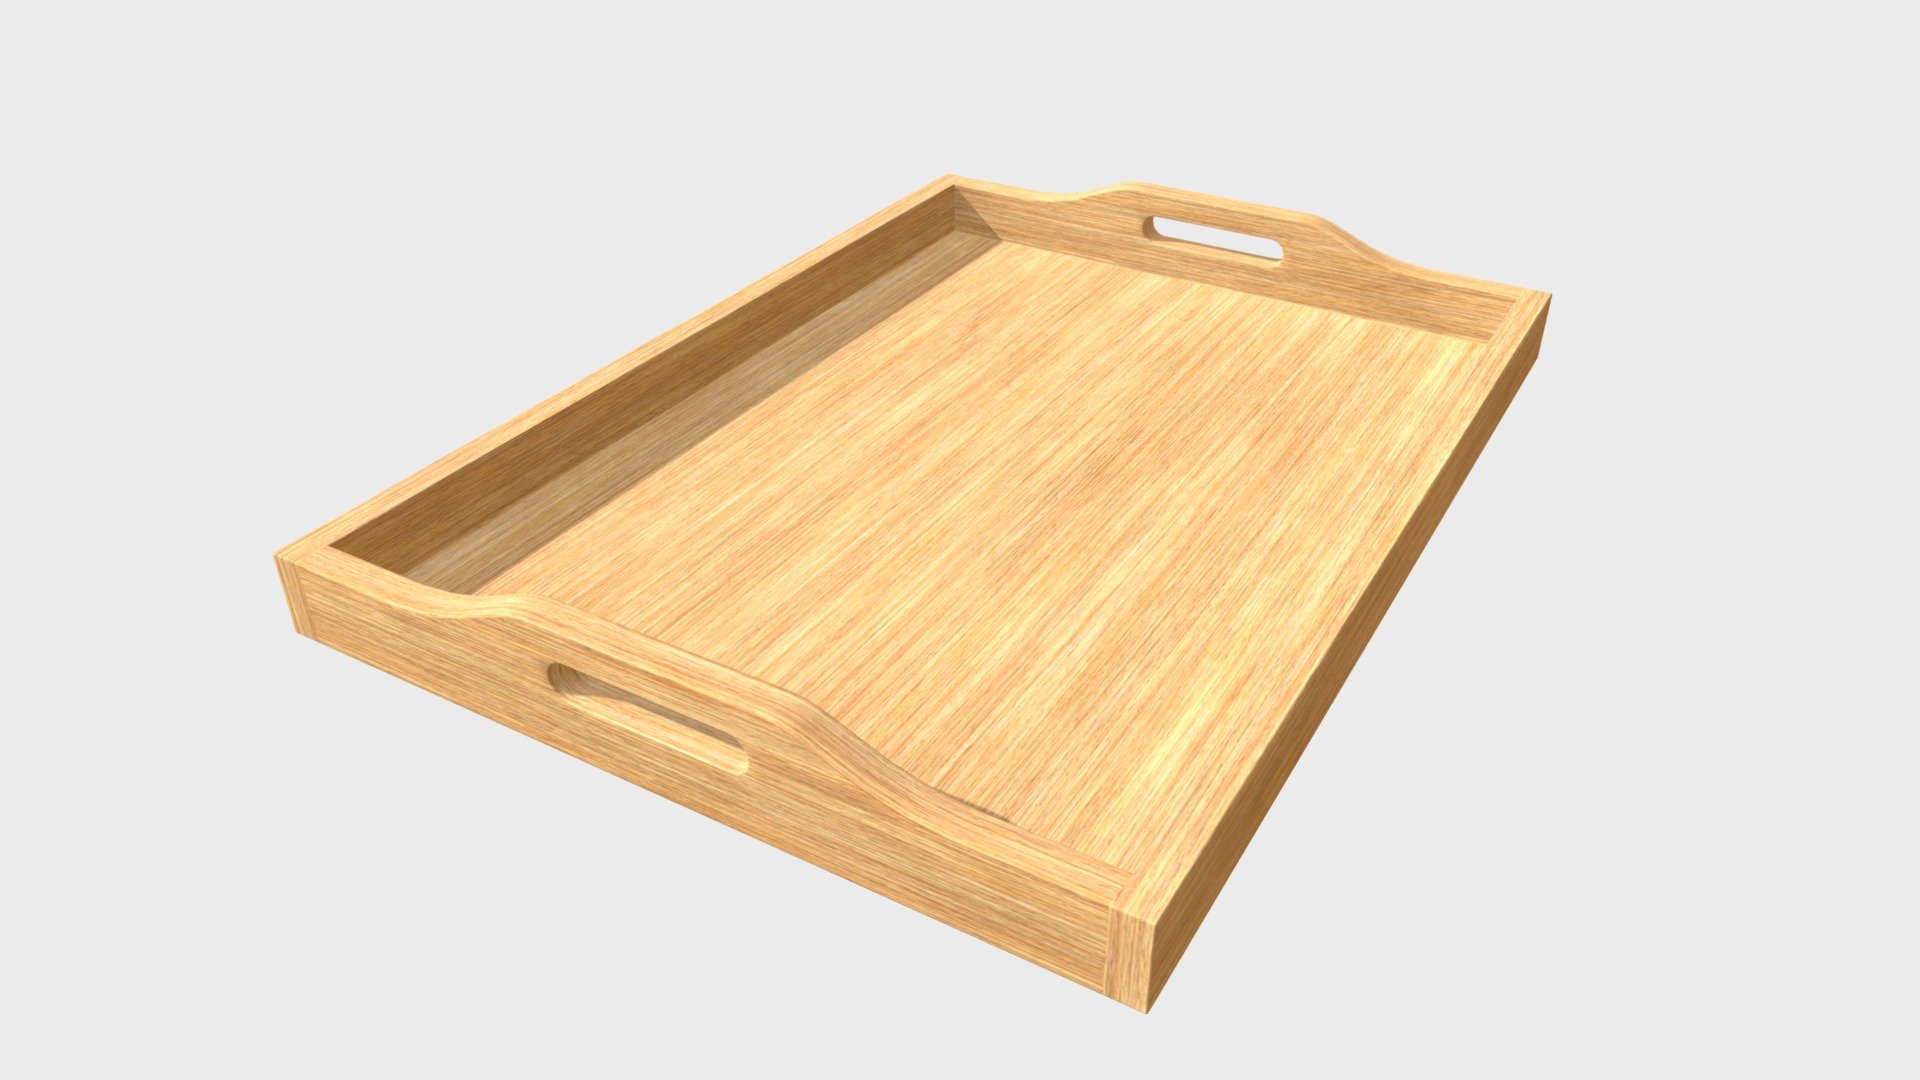 === The following description refers to the additional ZIP package provided with this model ===

Wooden serving tray 3D Model. Production-ready 3D Model, with PBR materials, textures, non overlapping UV Layout map provided in the package.

Quads only geometries (no tris/ngons).

Formats included: FBX, OBJ; scenes: BLEND (with Cycles / Eevee PBR Materials and Textures); other: 16-bit PNGs with Alpha.

1 Object (mesh), 1 PBR Material, UV unwrapped (non overlapping UV Layout map provided in the package); UV-mapped Textures.

UV Layout maps and Image Textures resolutions: 2048x2048; PBR Textures made with Substance Painter.

Polygonal, QUADS ONLY (no tris/ngons); 2950 vertices, 2952 quad faces (5904 tris).

Real world dimensions; scene scale units: cm in Blender 3.3 (that is: Metric with 0.01 scale).

Uniform scale object (scale applied in Blender 3.3) 3d model